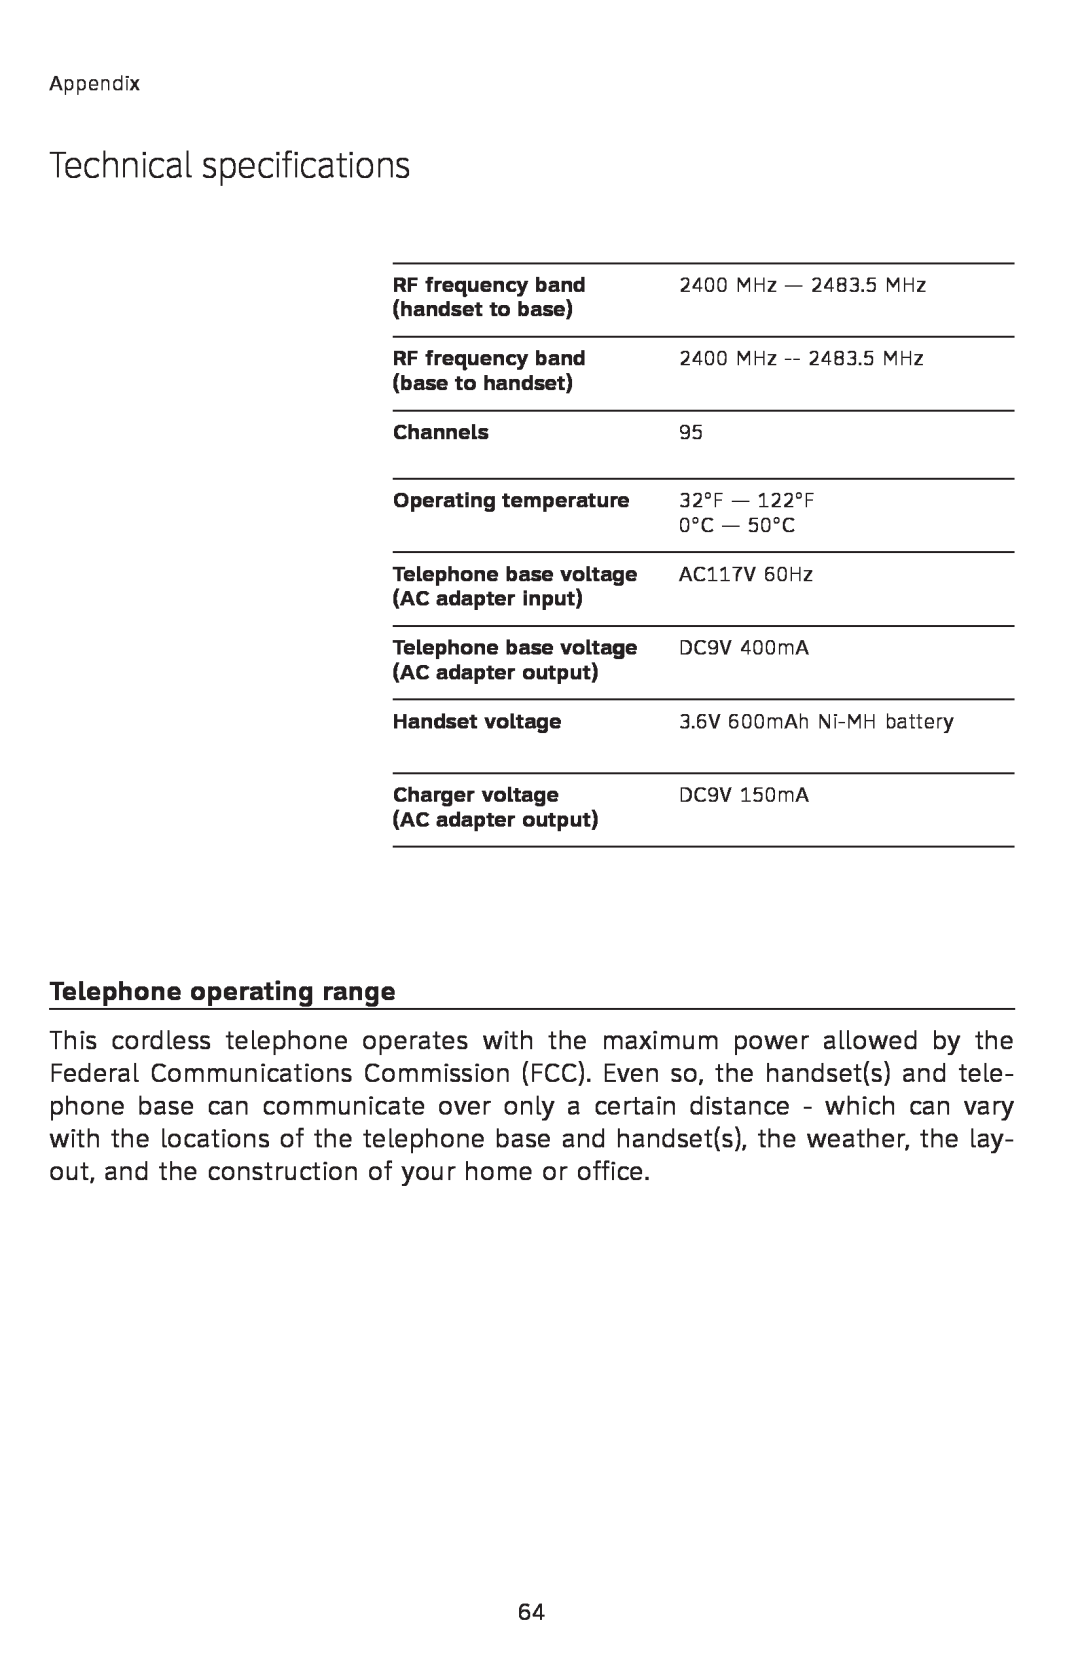 AT&T E2912 user manual Technical specifications, Telephone operating range 